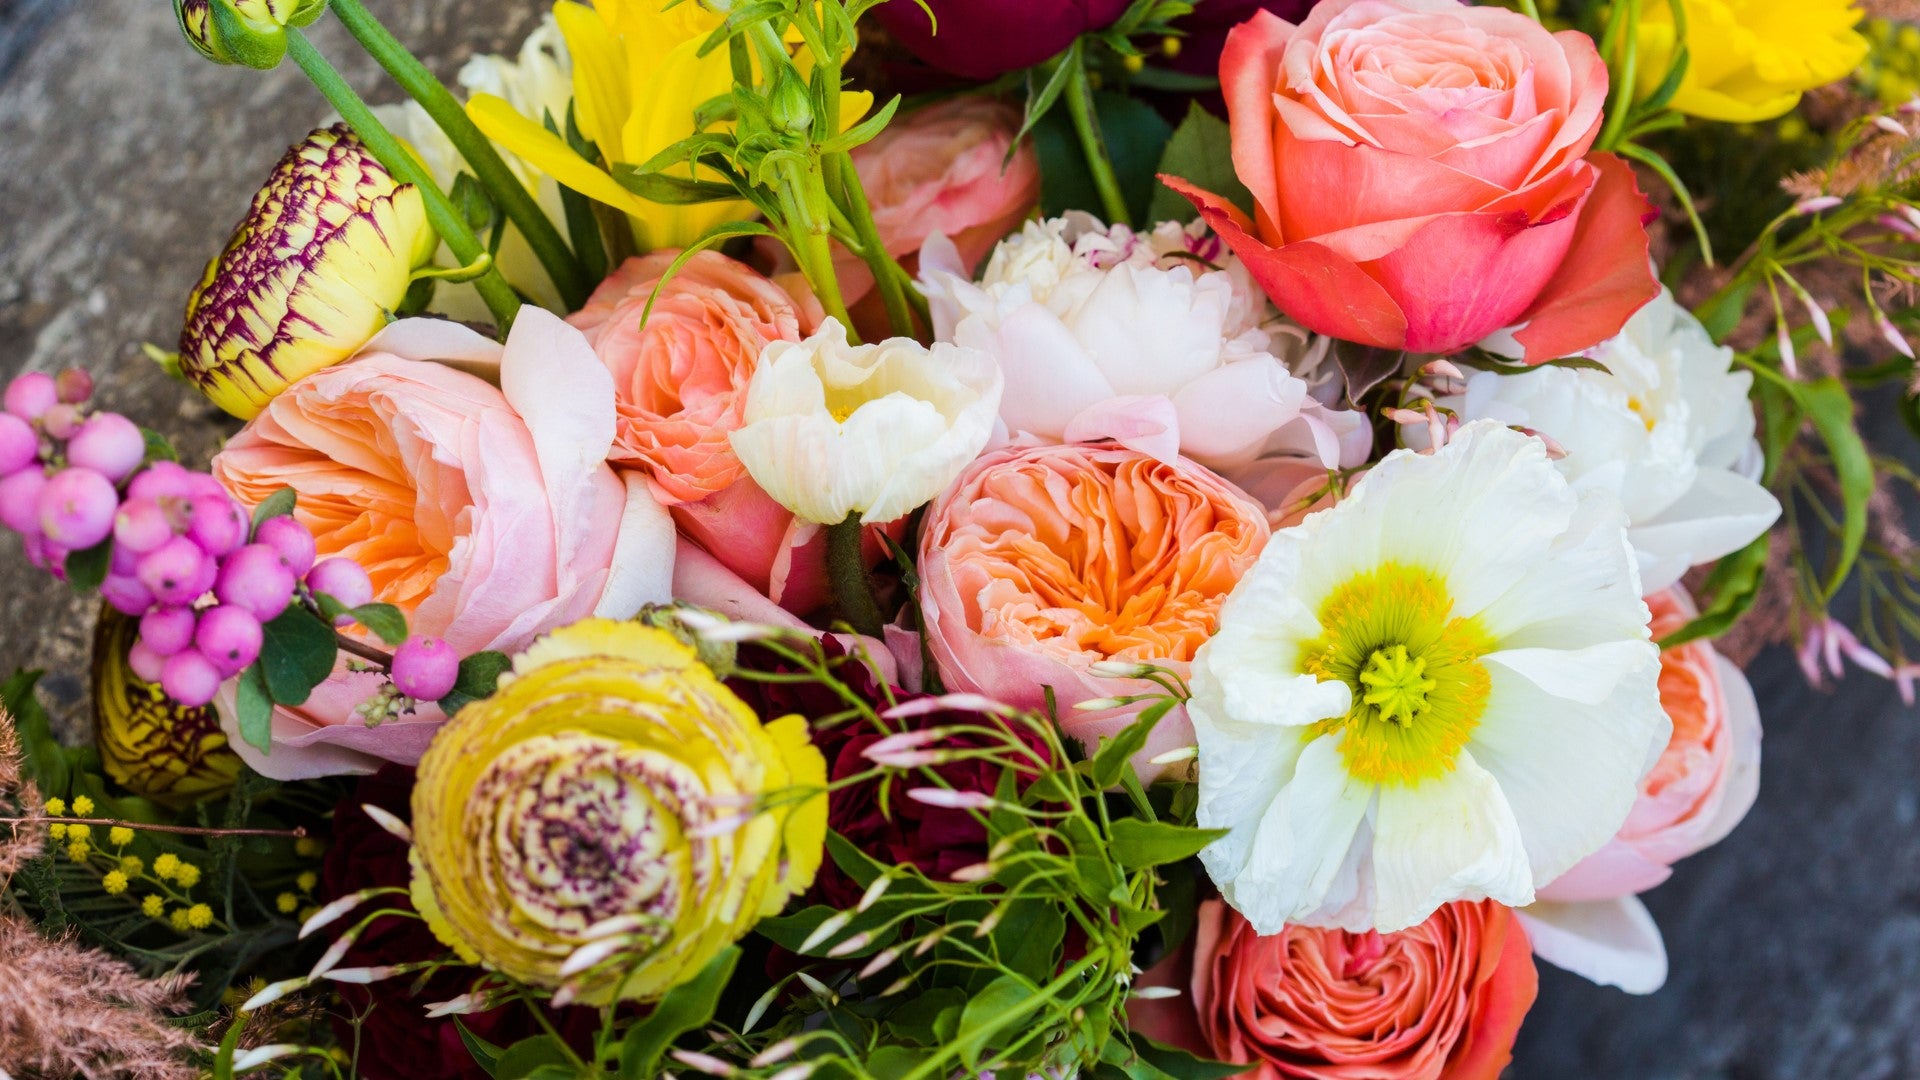 Passover selection of spring flowers 